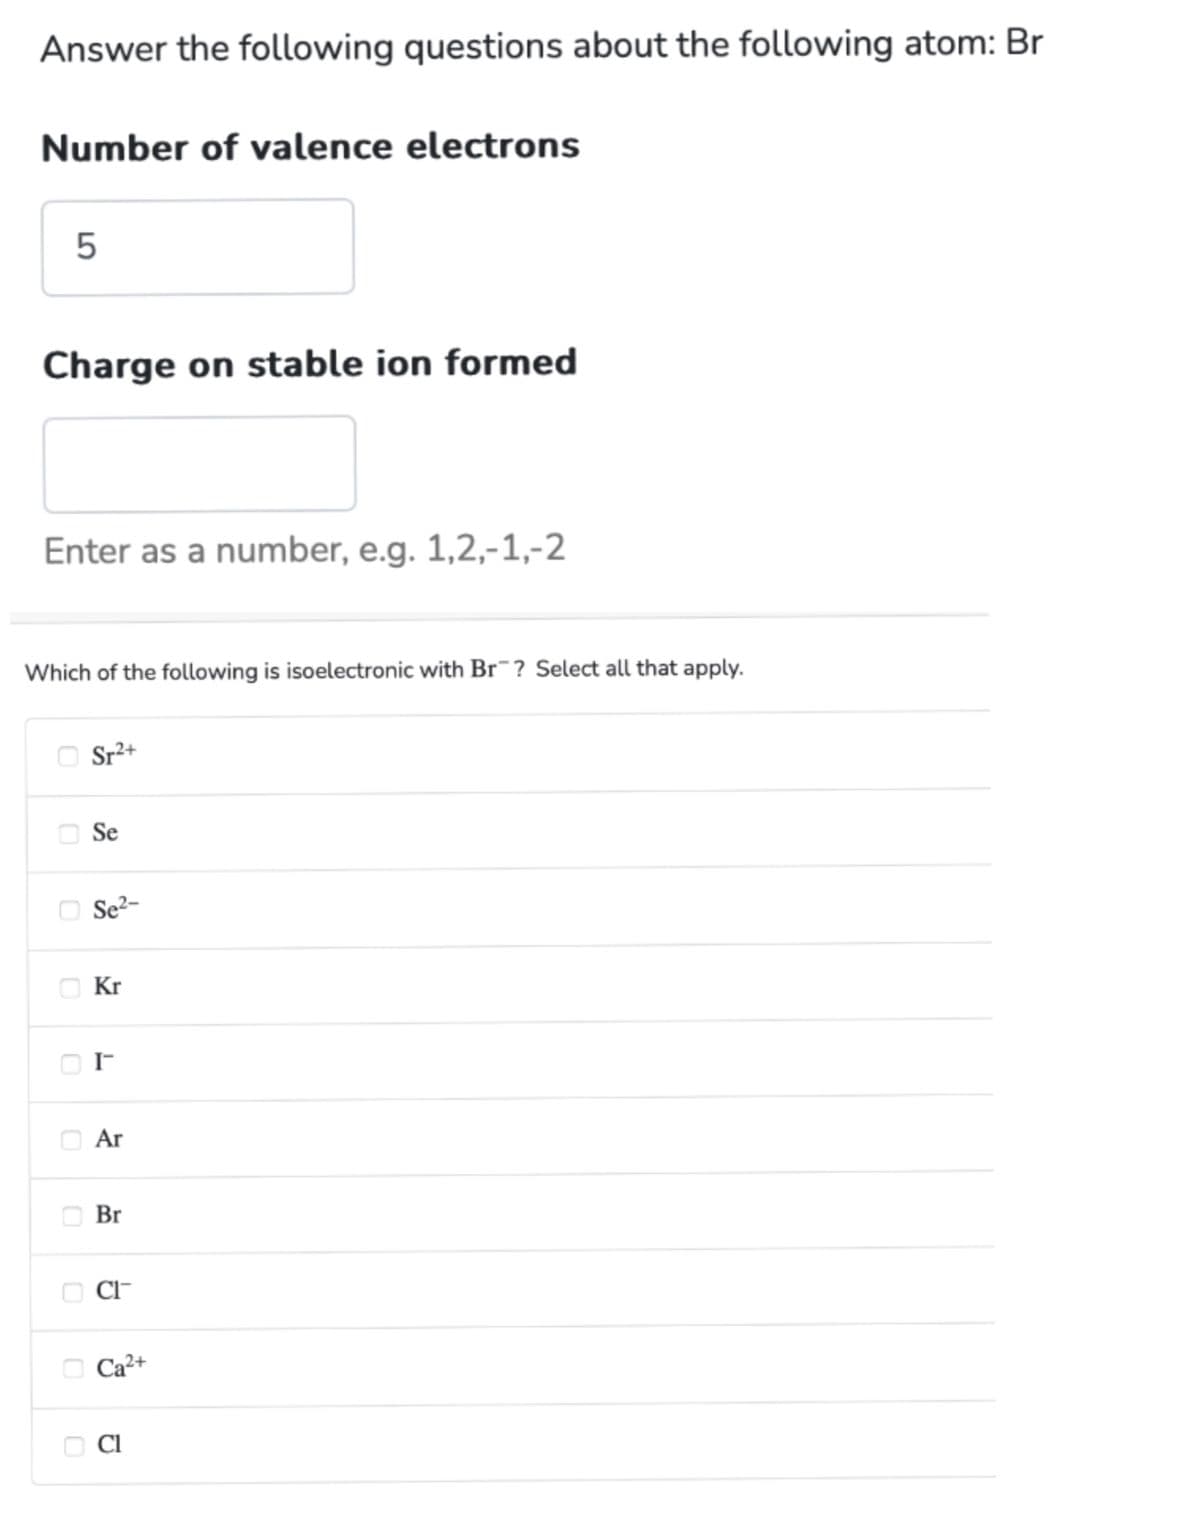 Answer the following questions about the following atom: Br
Number of valence electrons
5
Charge on stable ion formed
Enter as a number, e.g. 1,2,-1,-2
Which of the following is isoelectronic with Br? Select all that apply.
Sr²+
Se
Se²-
Kr
I™
Ar
Br
CI™
Ca²+
Cl